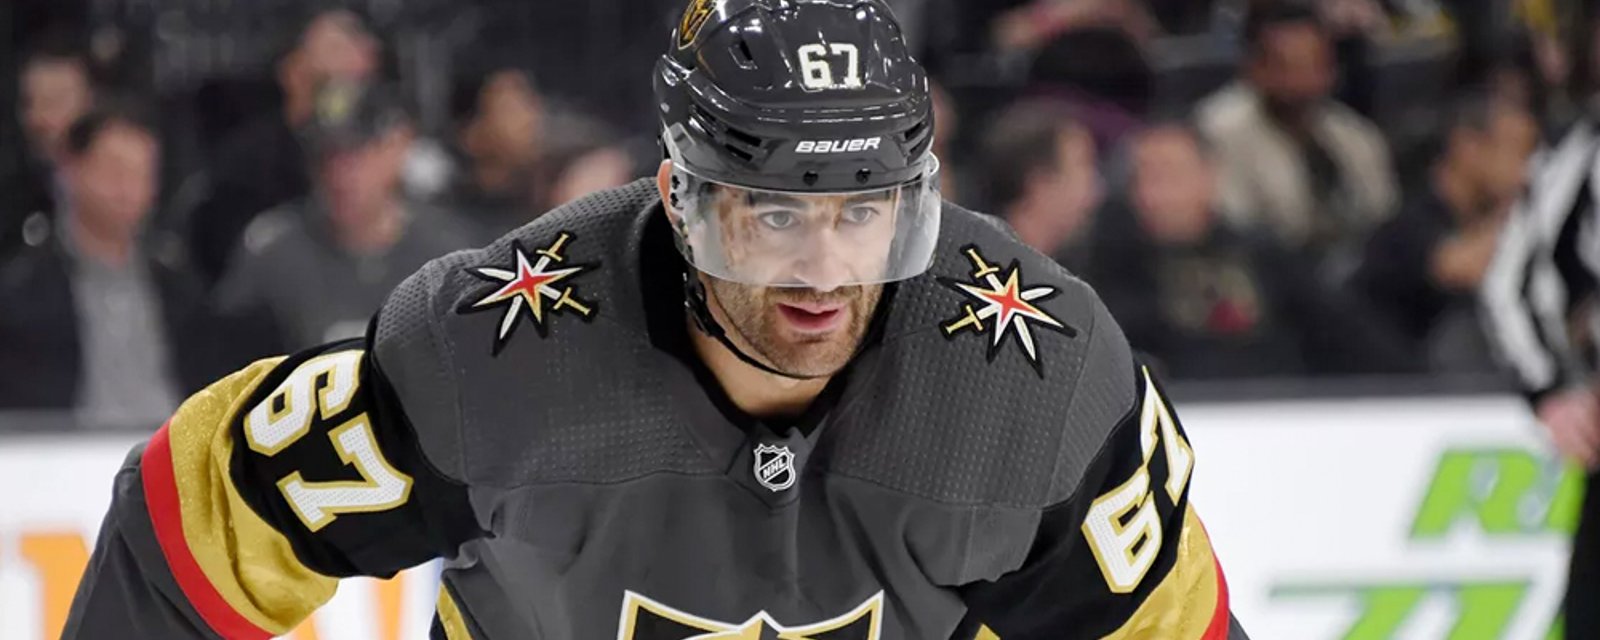 Pacioretty out of lineup, coach Deboer confirms it’s “not a positive test”